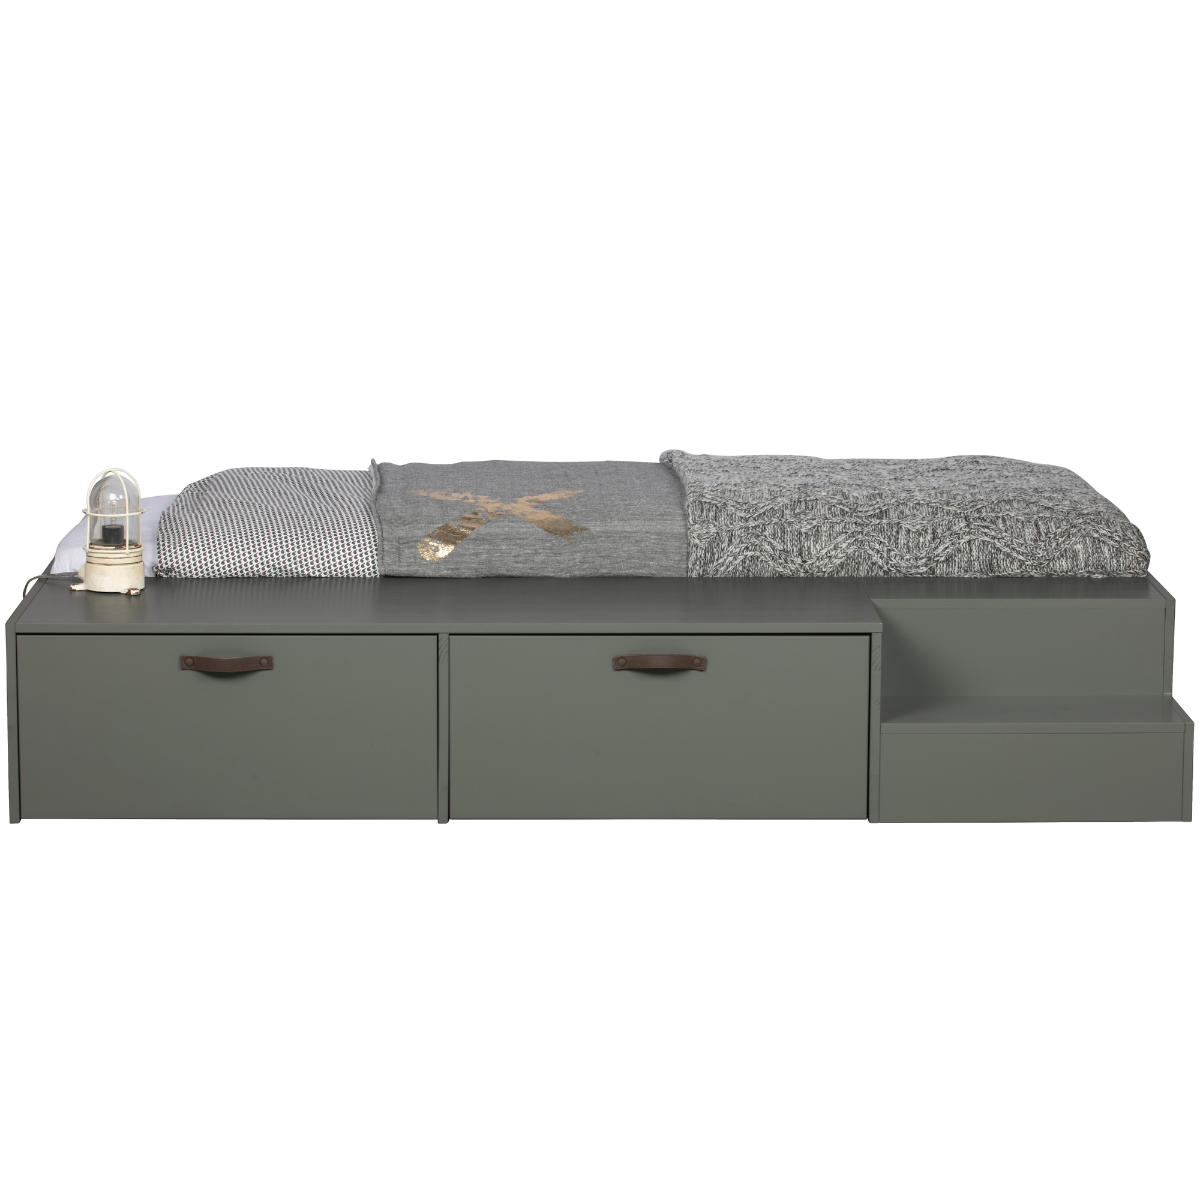 Stage Soap Pine Wood Bed with Drawers